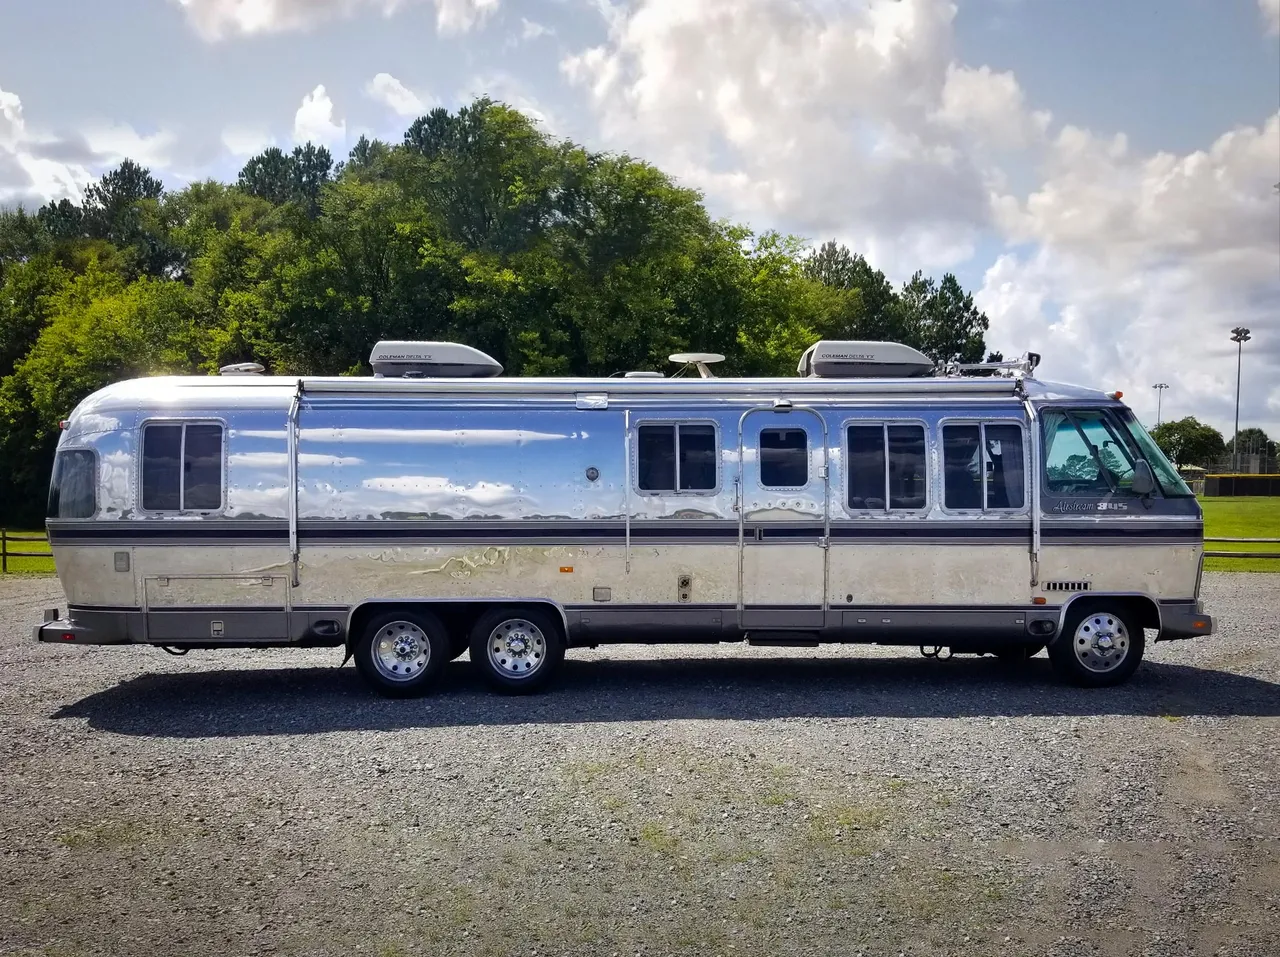 Airstream mobile activation and branded airtsream RV